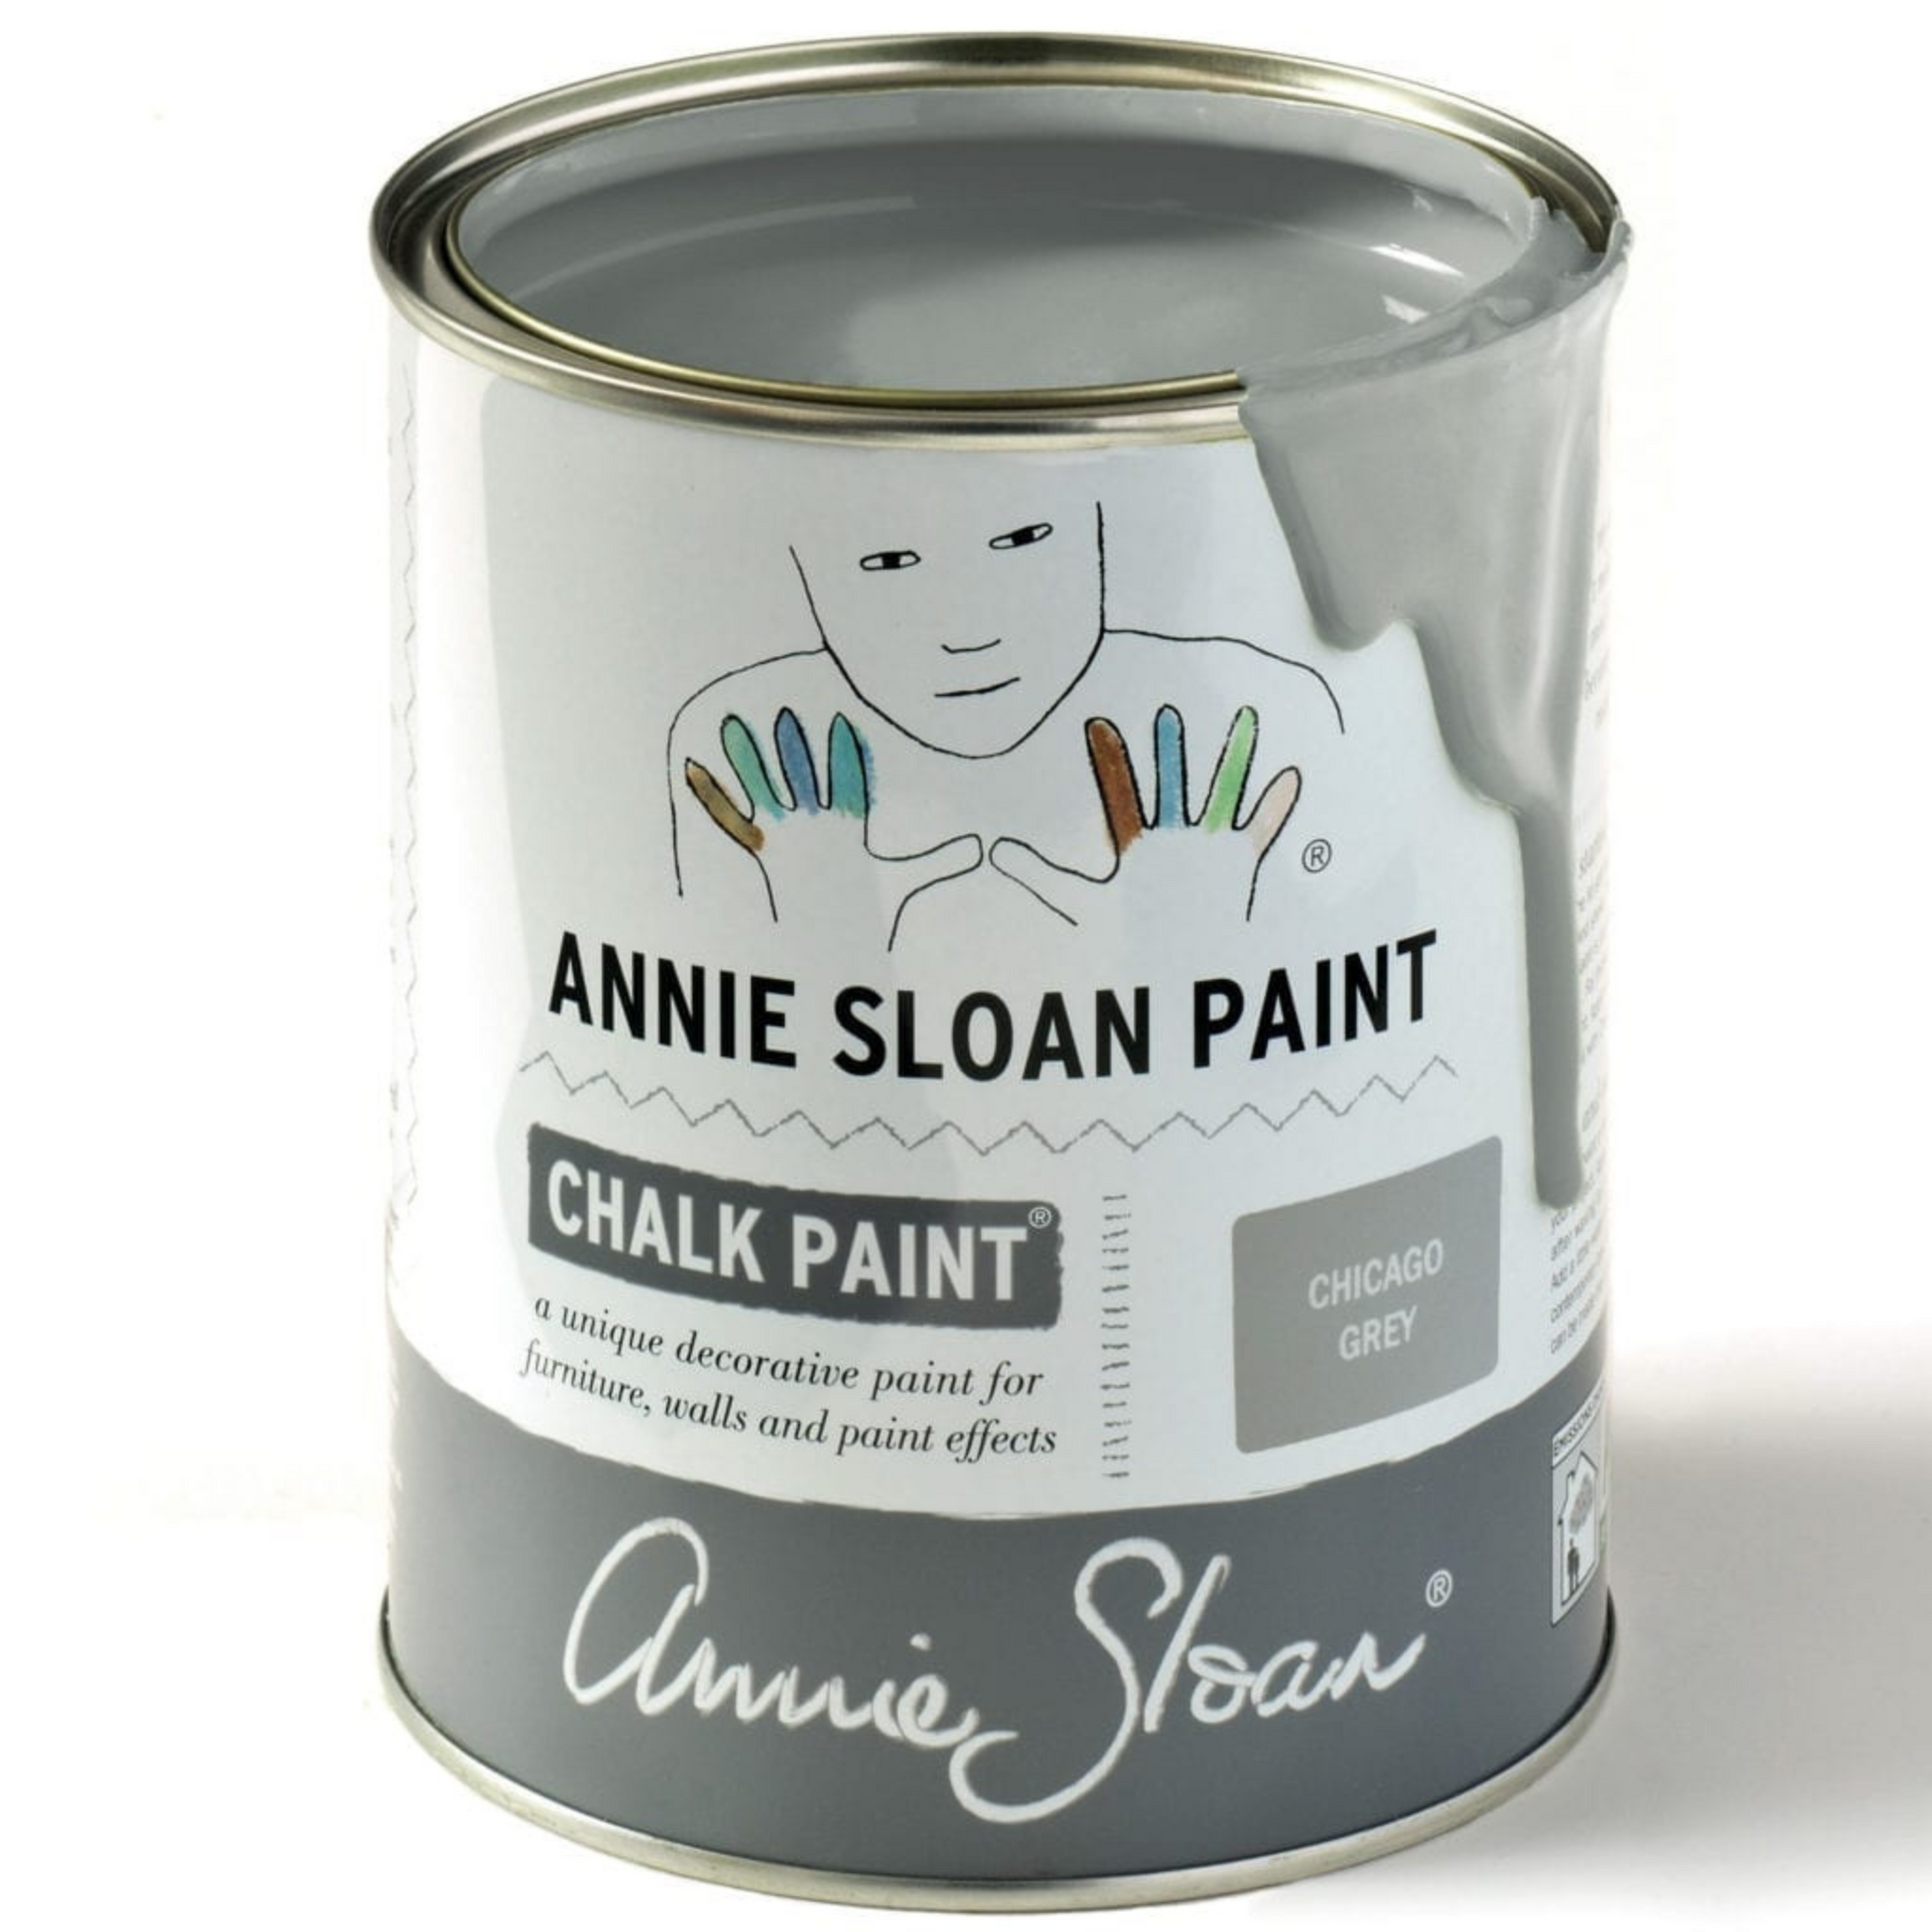 Can of Chateau Grey Annie Sloan Chalk Paint